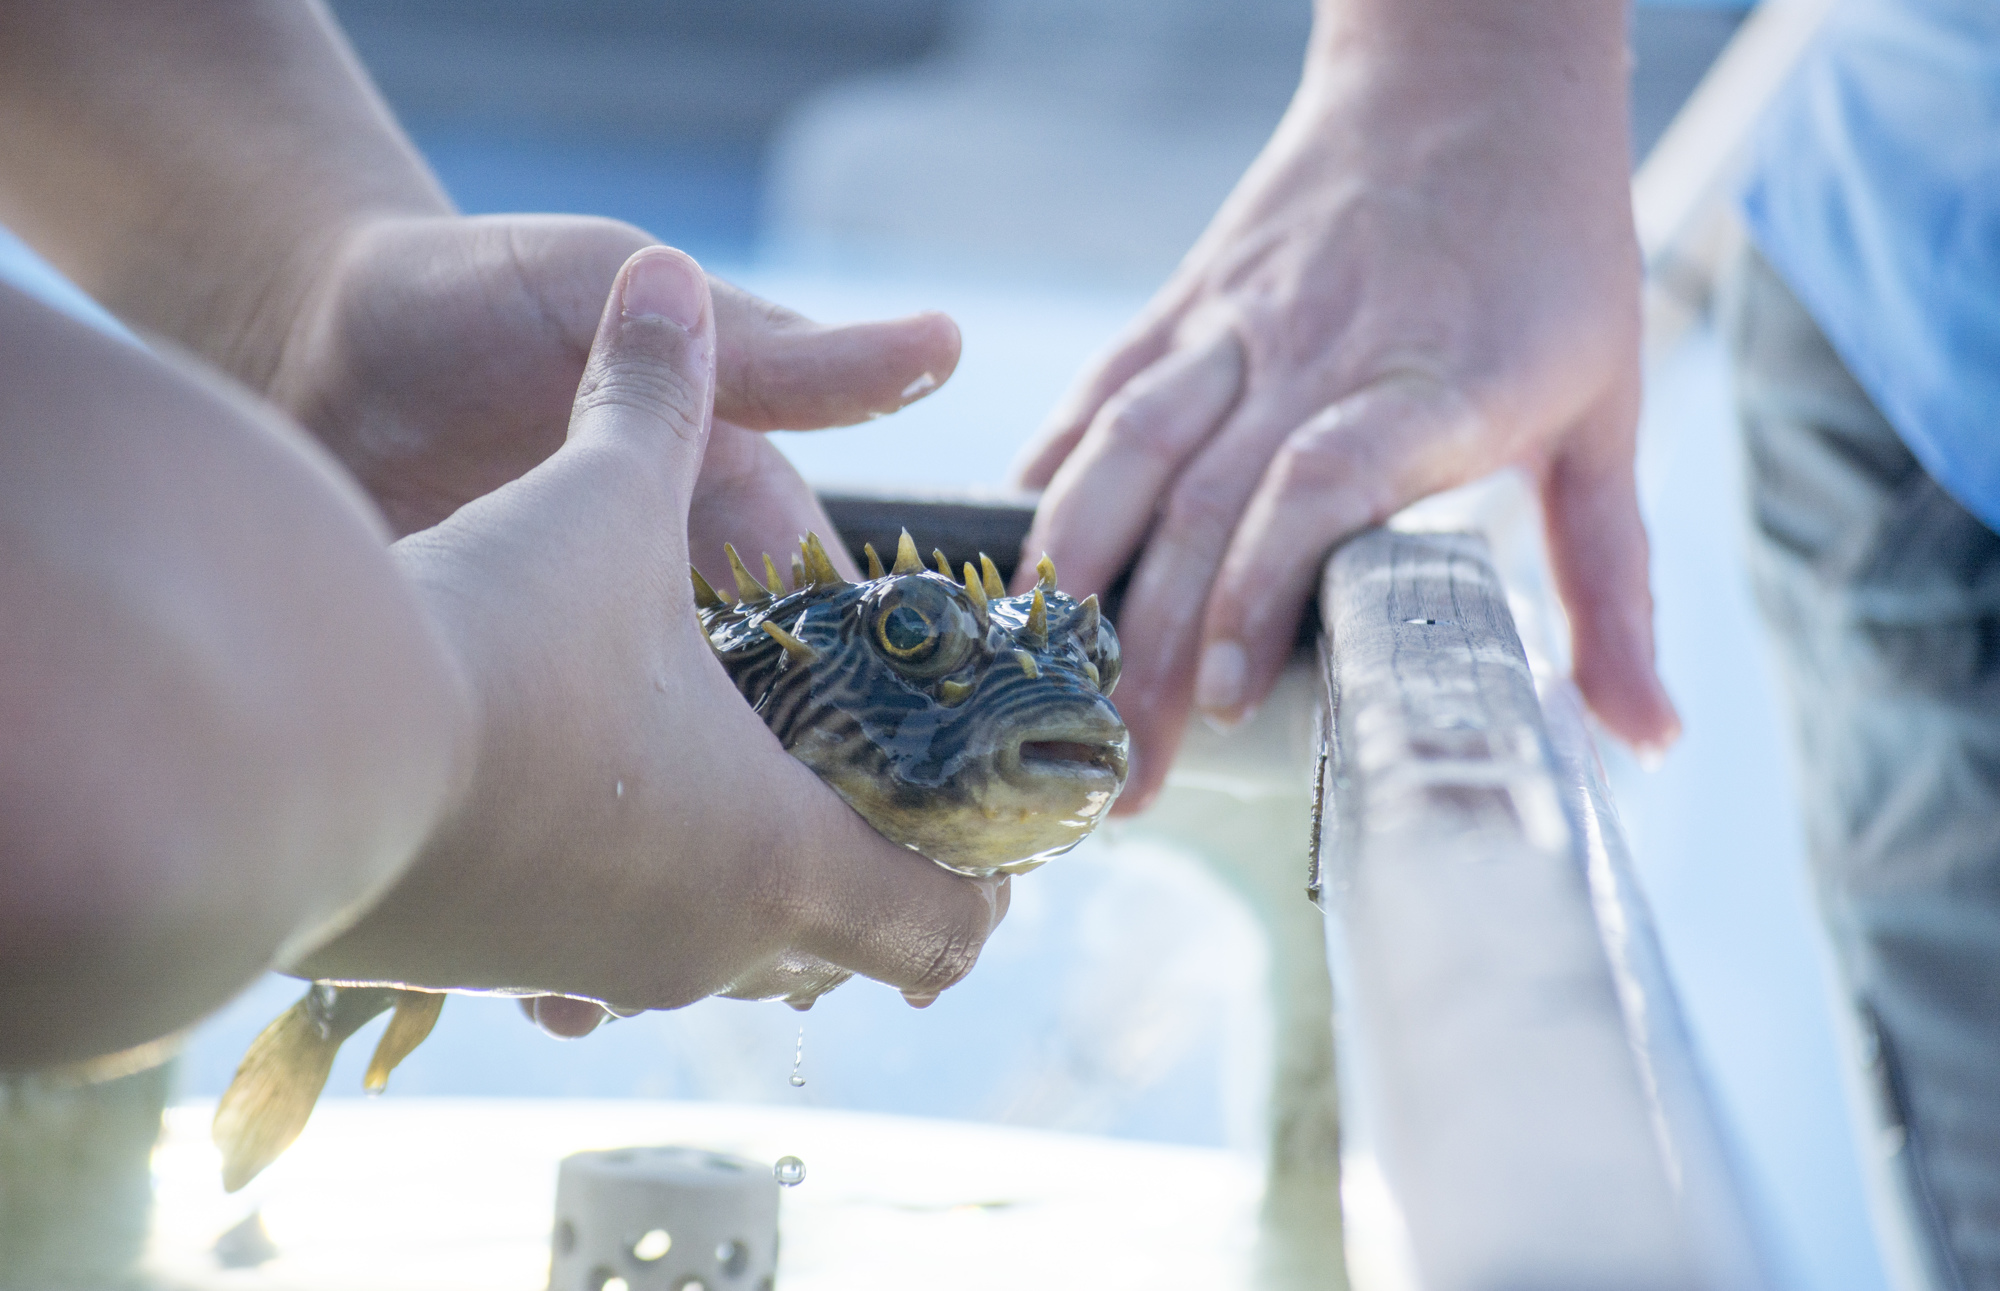 Sarasota Middle School students handle a striped burrfish on the Carefree Learner. 